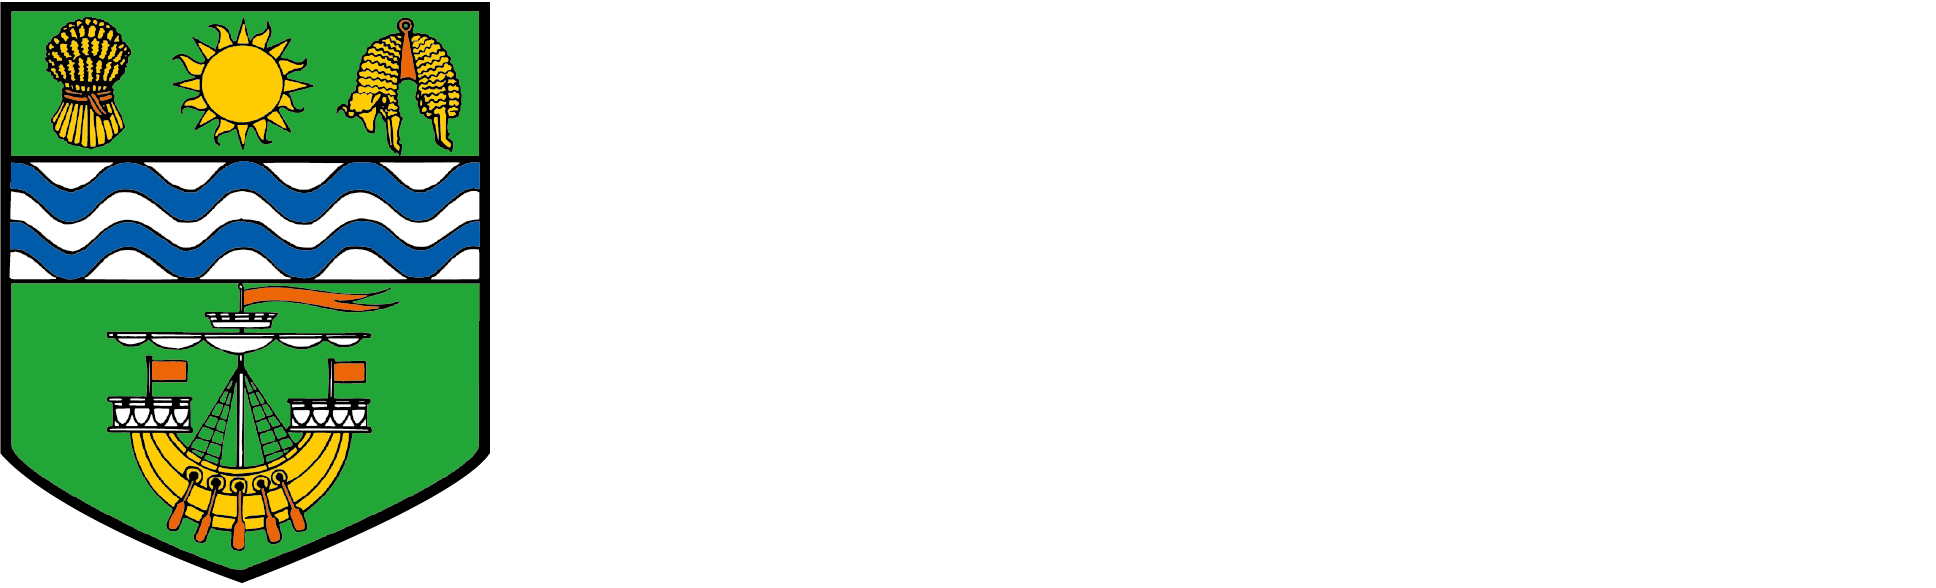 Central Hawkes Bay District Council